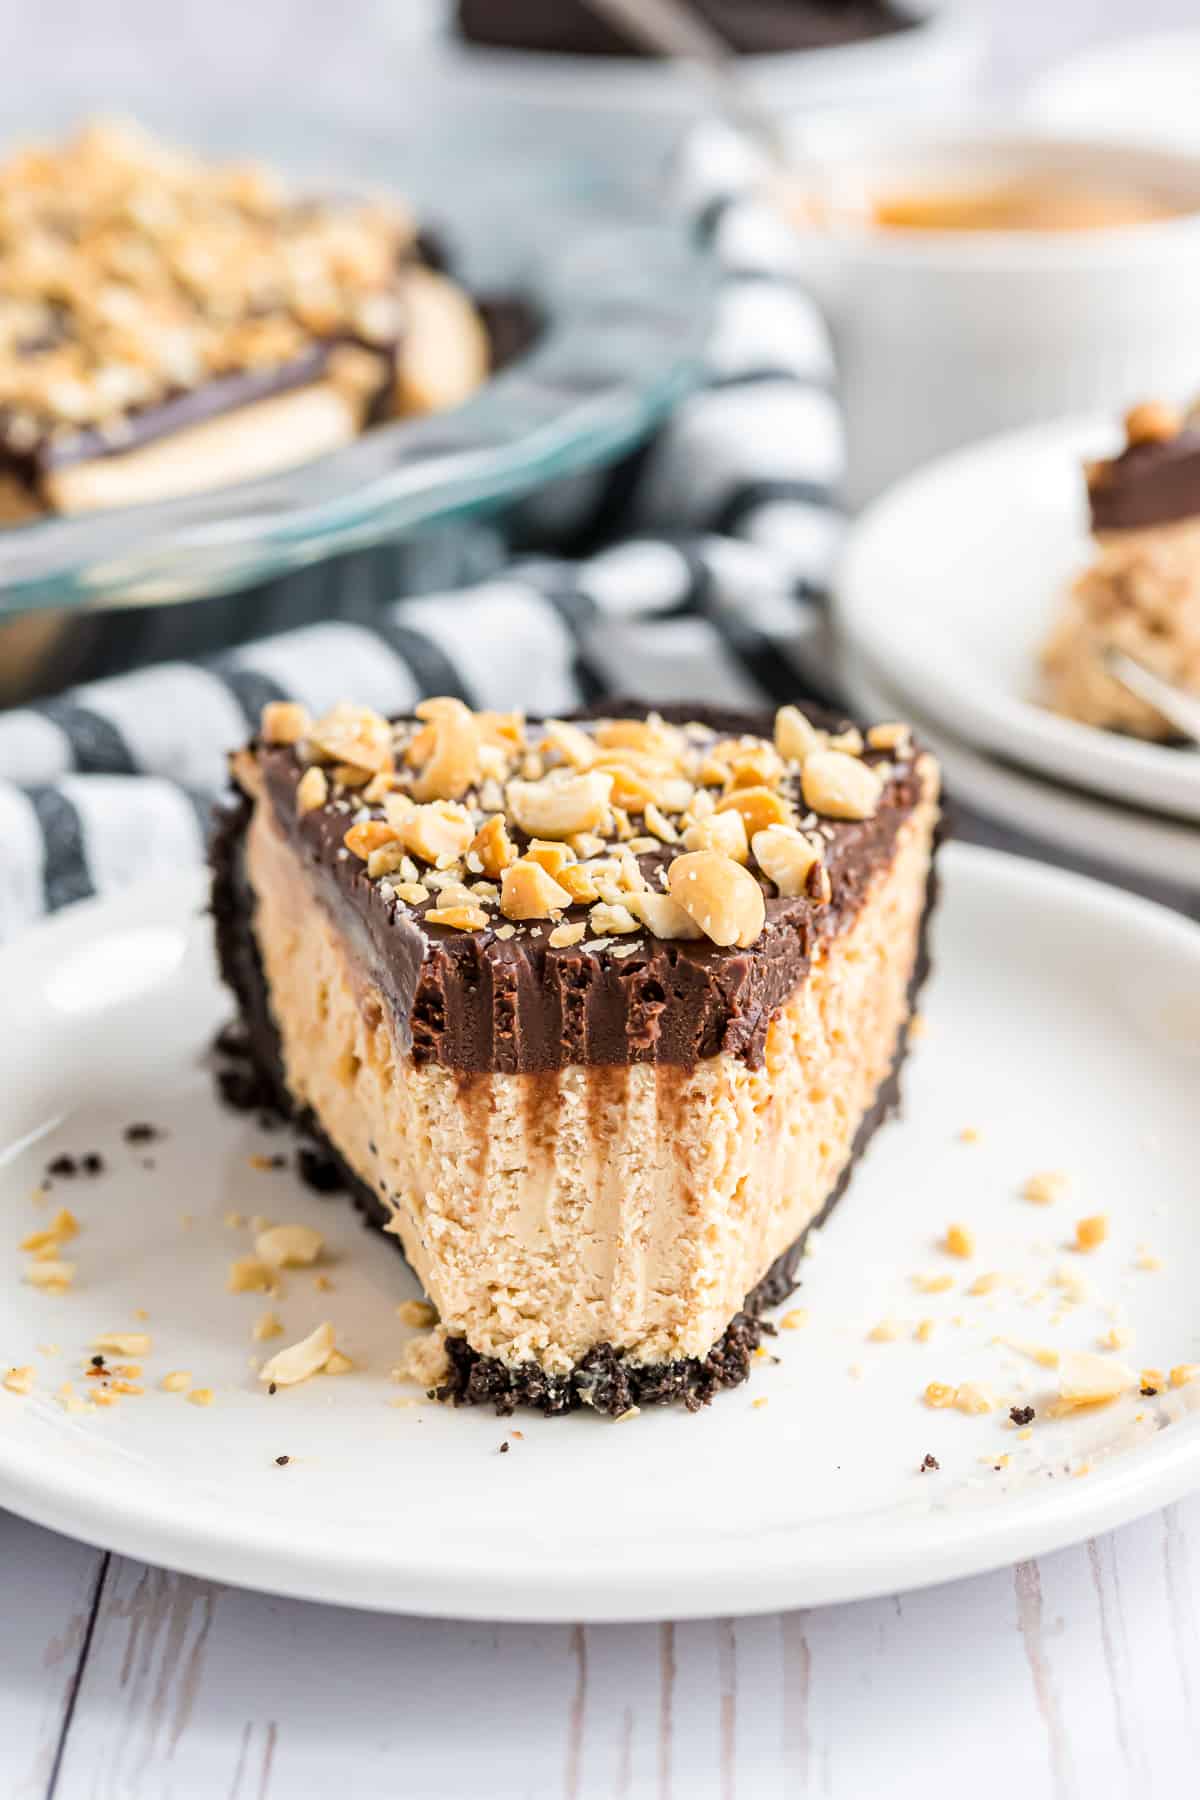 Slice of chocolate peanut butter pie with a fork mark, showing a bite removed.